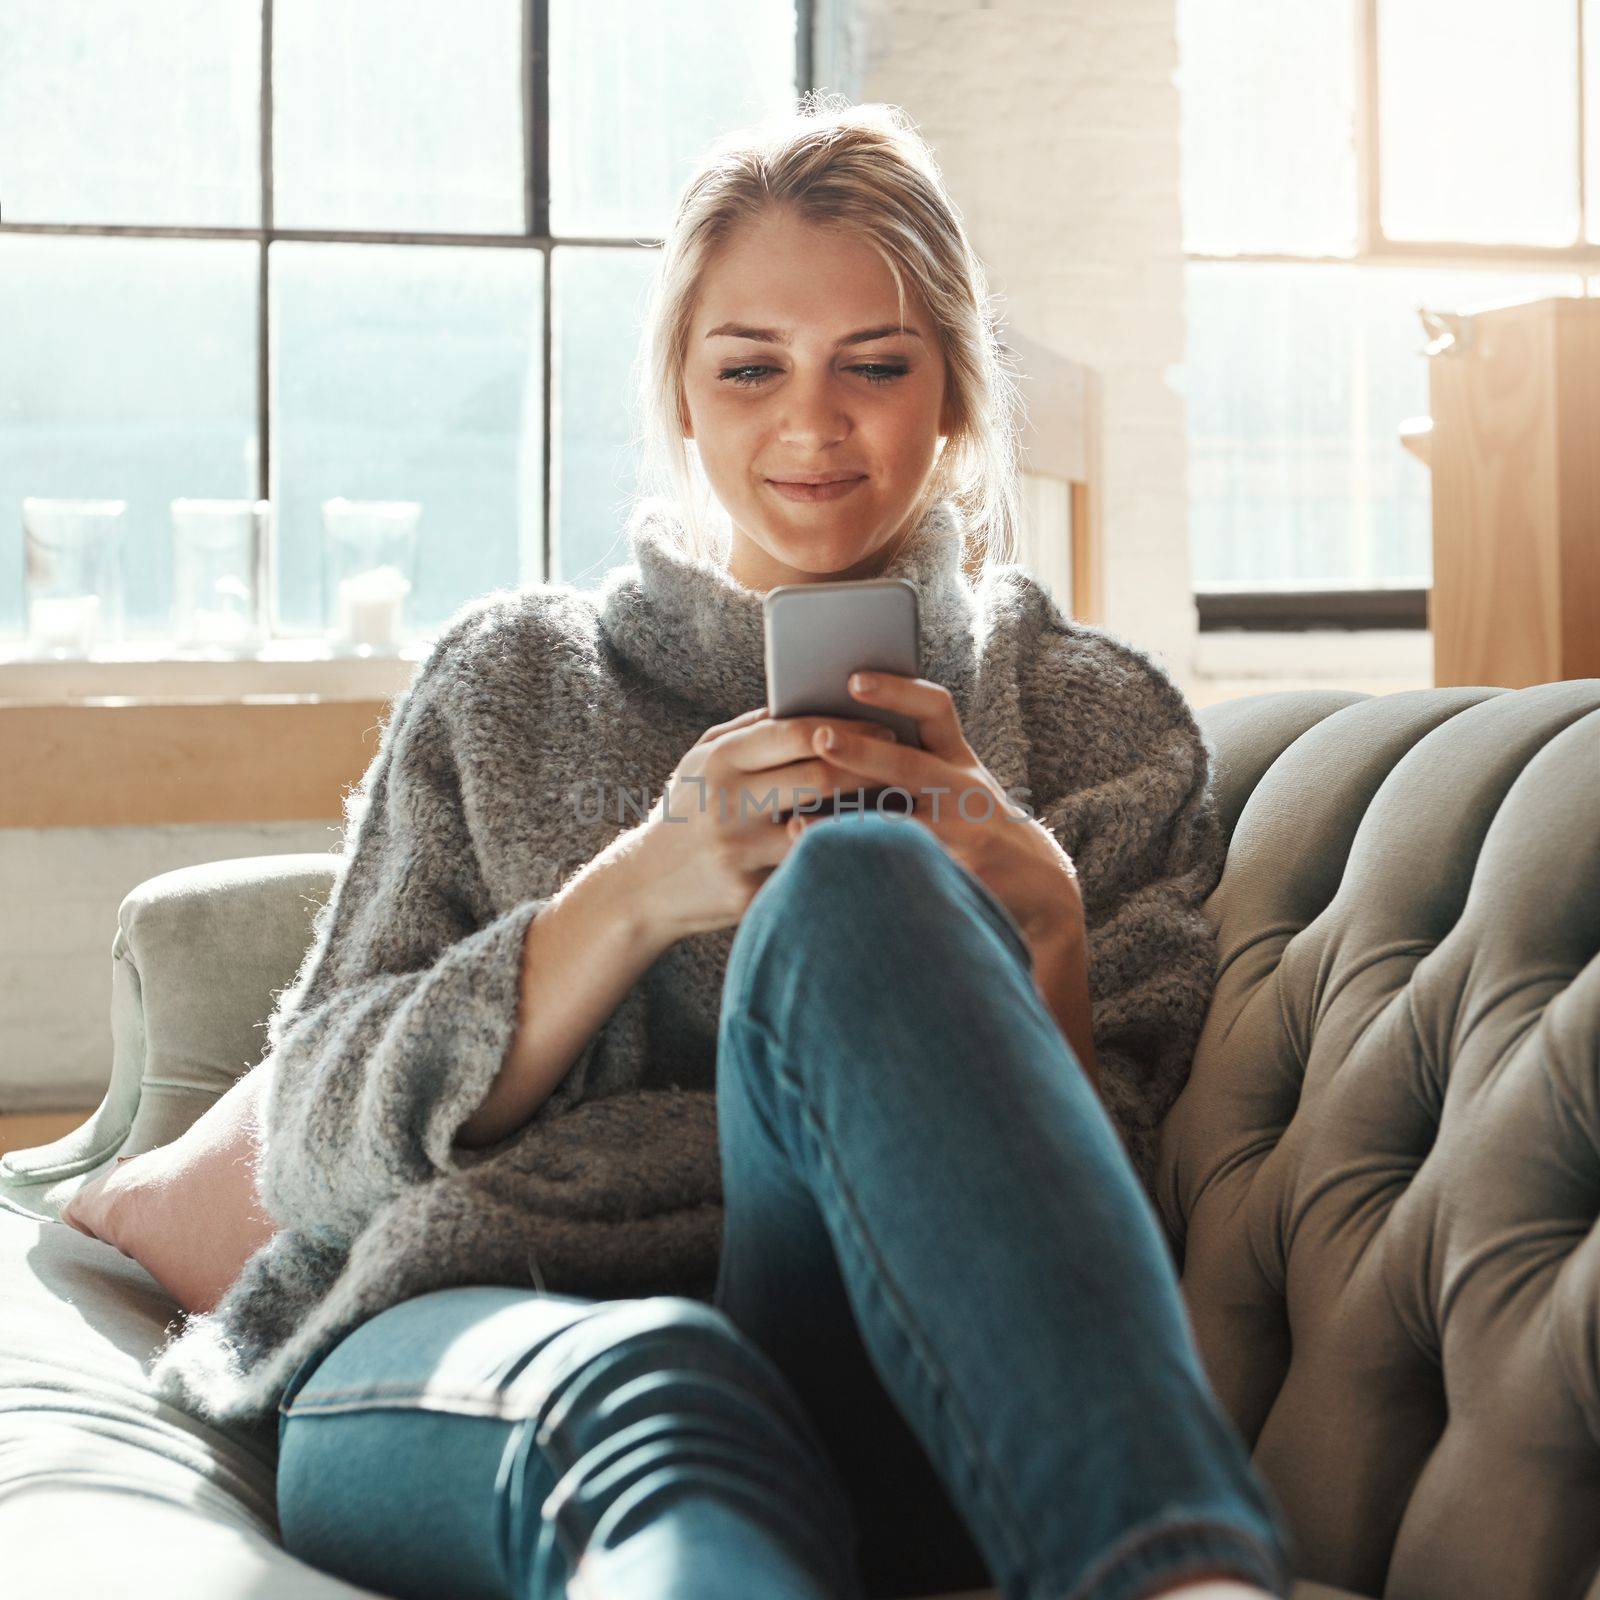 Woman, sofa and smartphone on social media, reading or communication on internet to relax in lounge. Girl, couch and chat with phone, mobile tech or online dating for partner, love or romance in home.